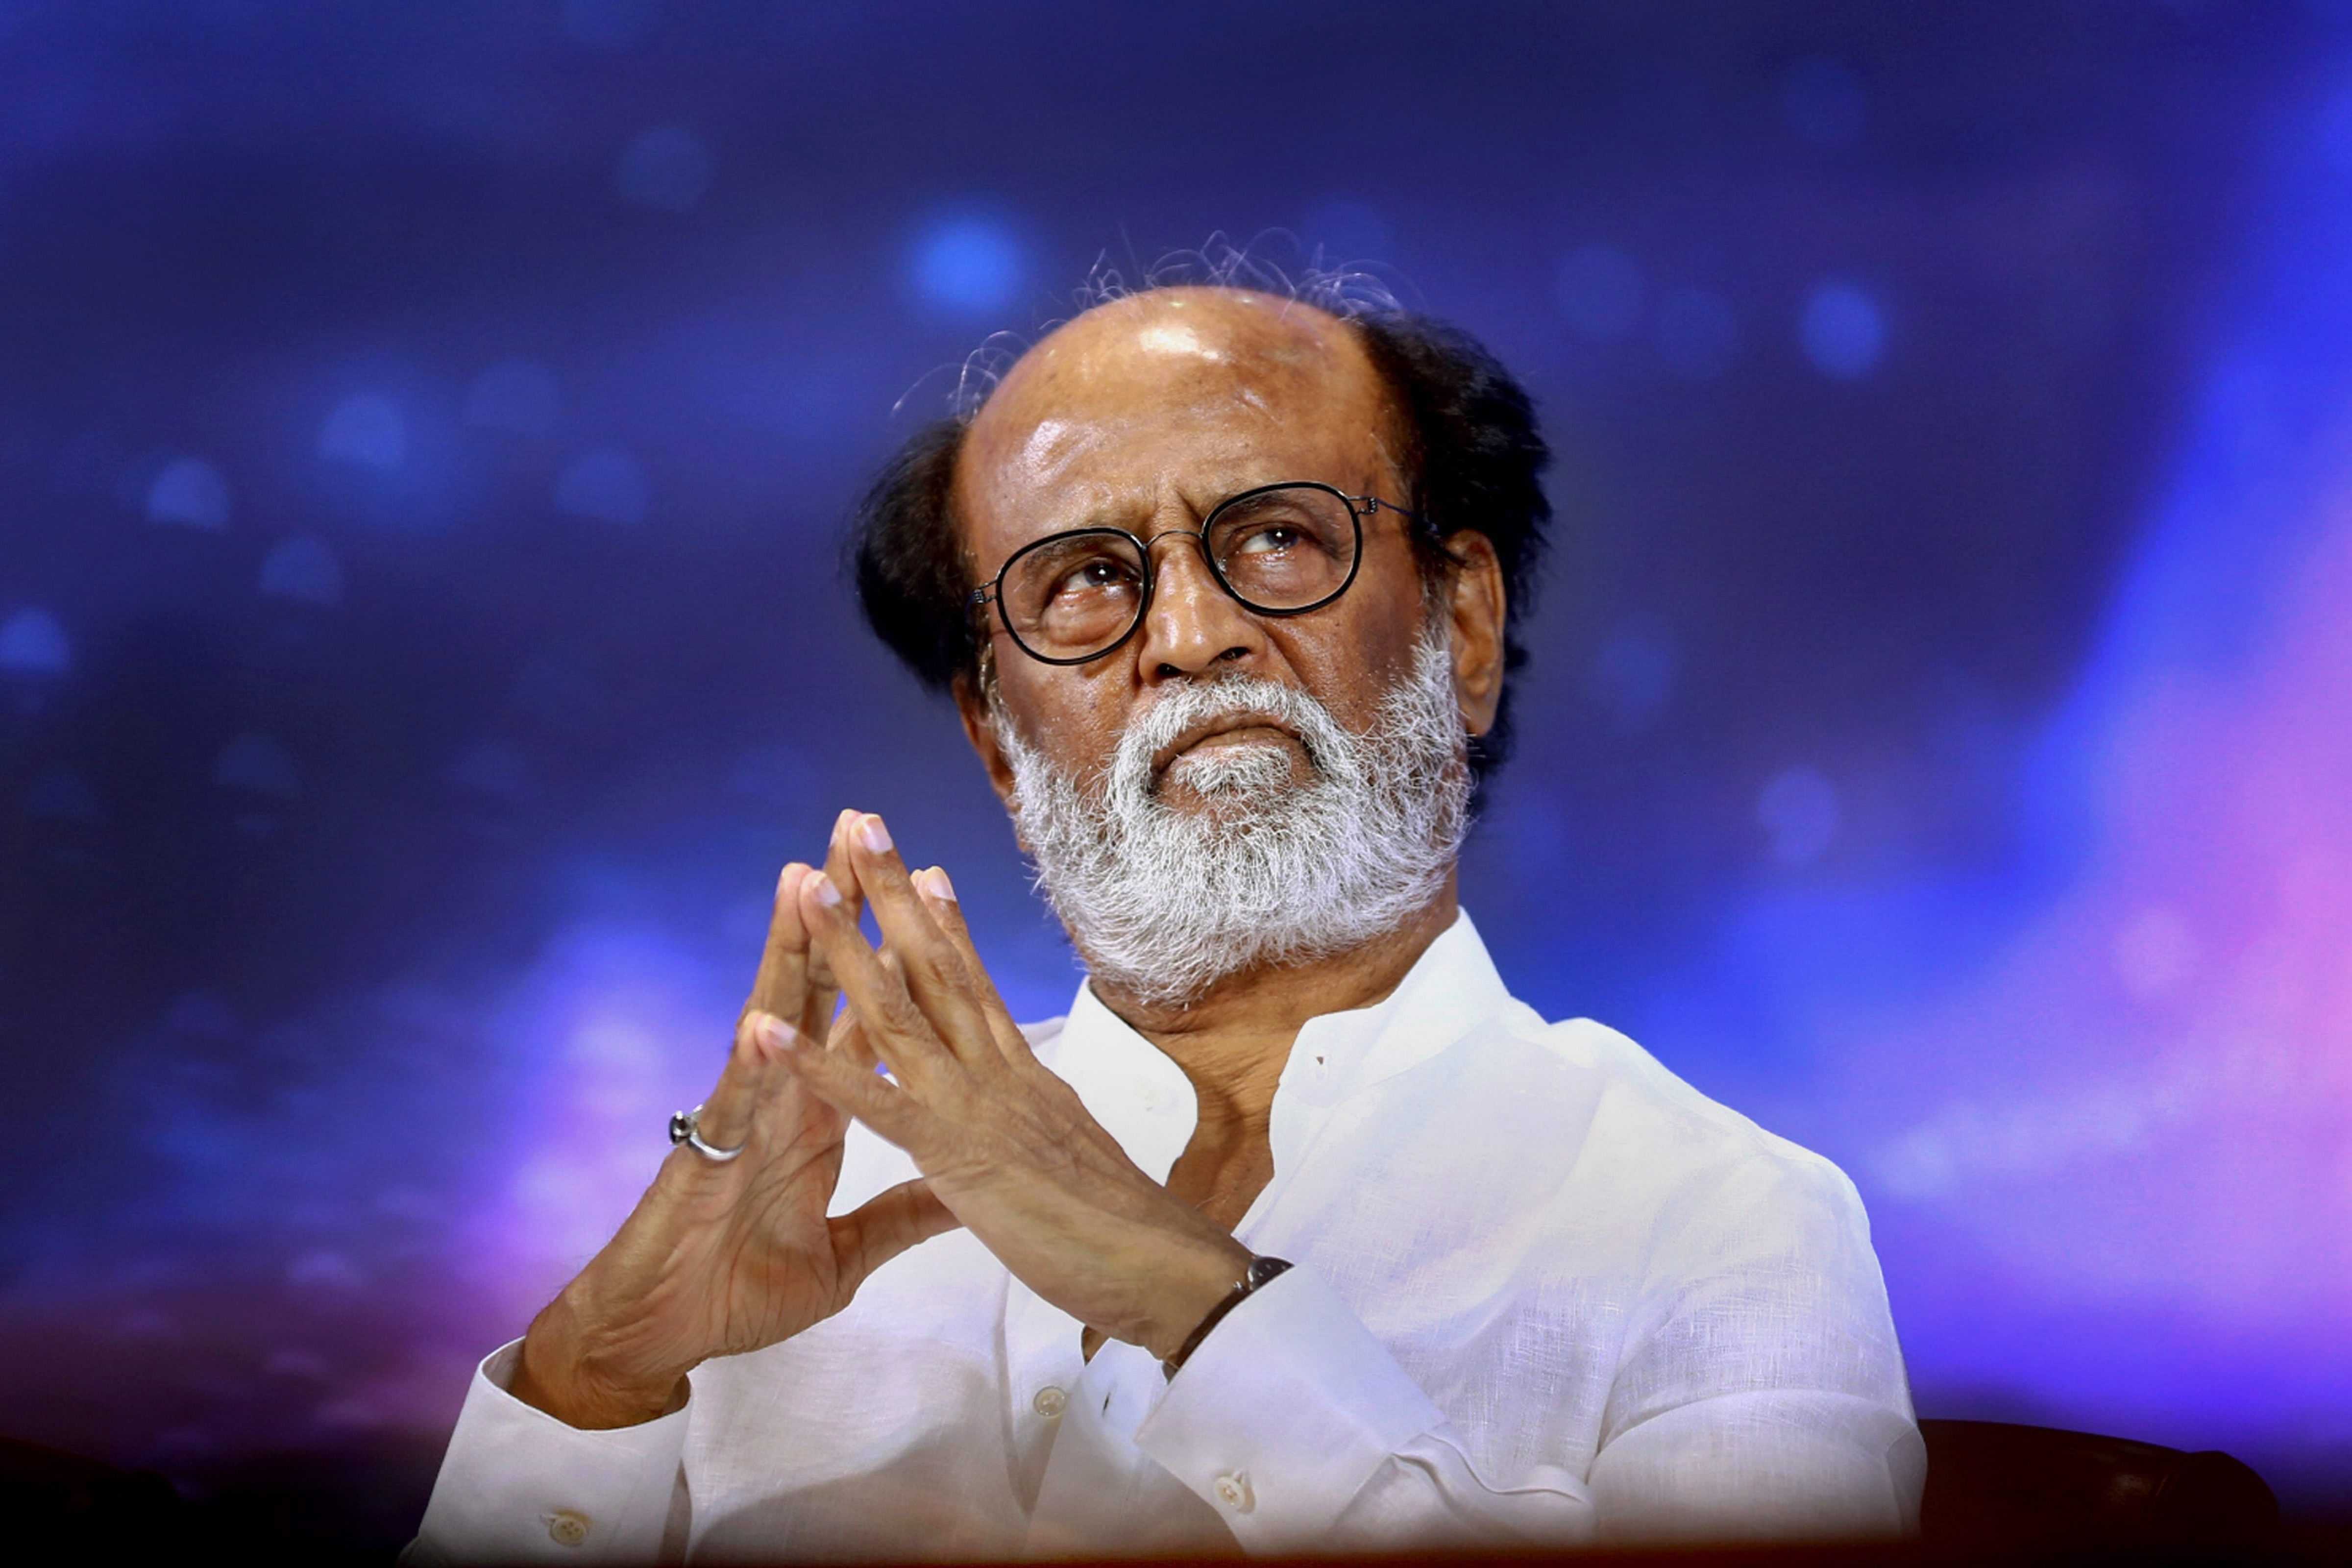 Actor Rajinikanth in a statement without naming the DMK, said: "no force" can separate him from his fans and urged his followers to tread the path of fairness. PTI file photo